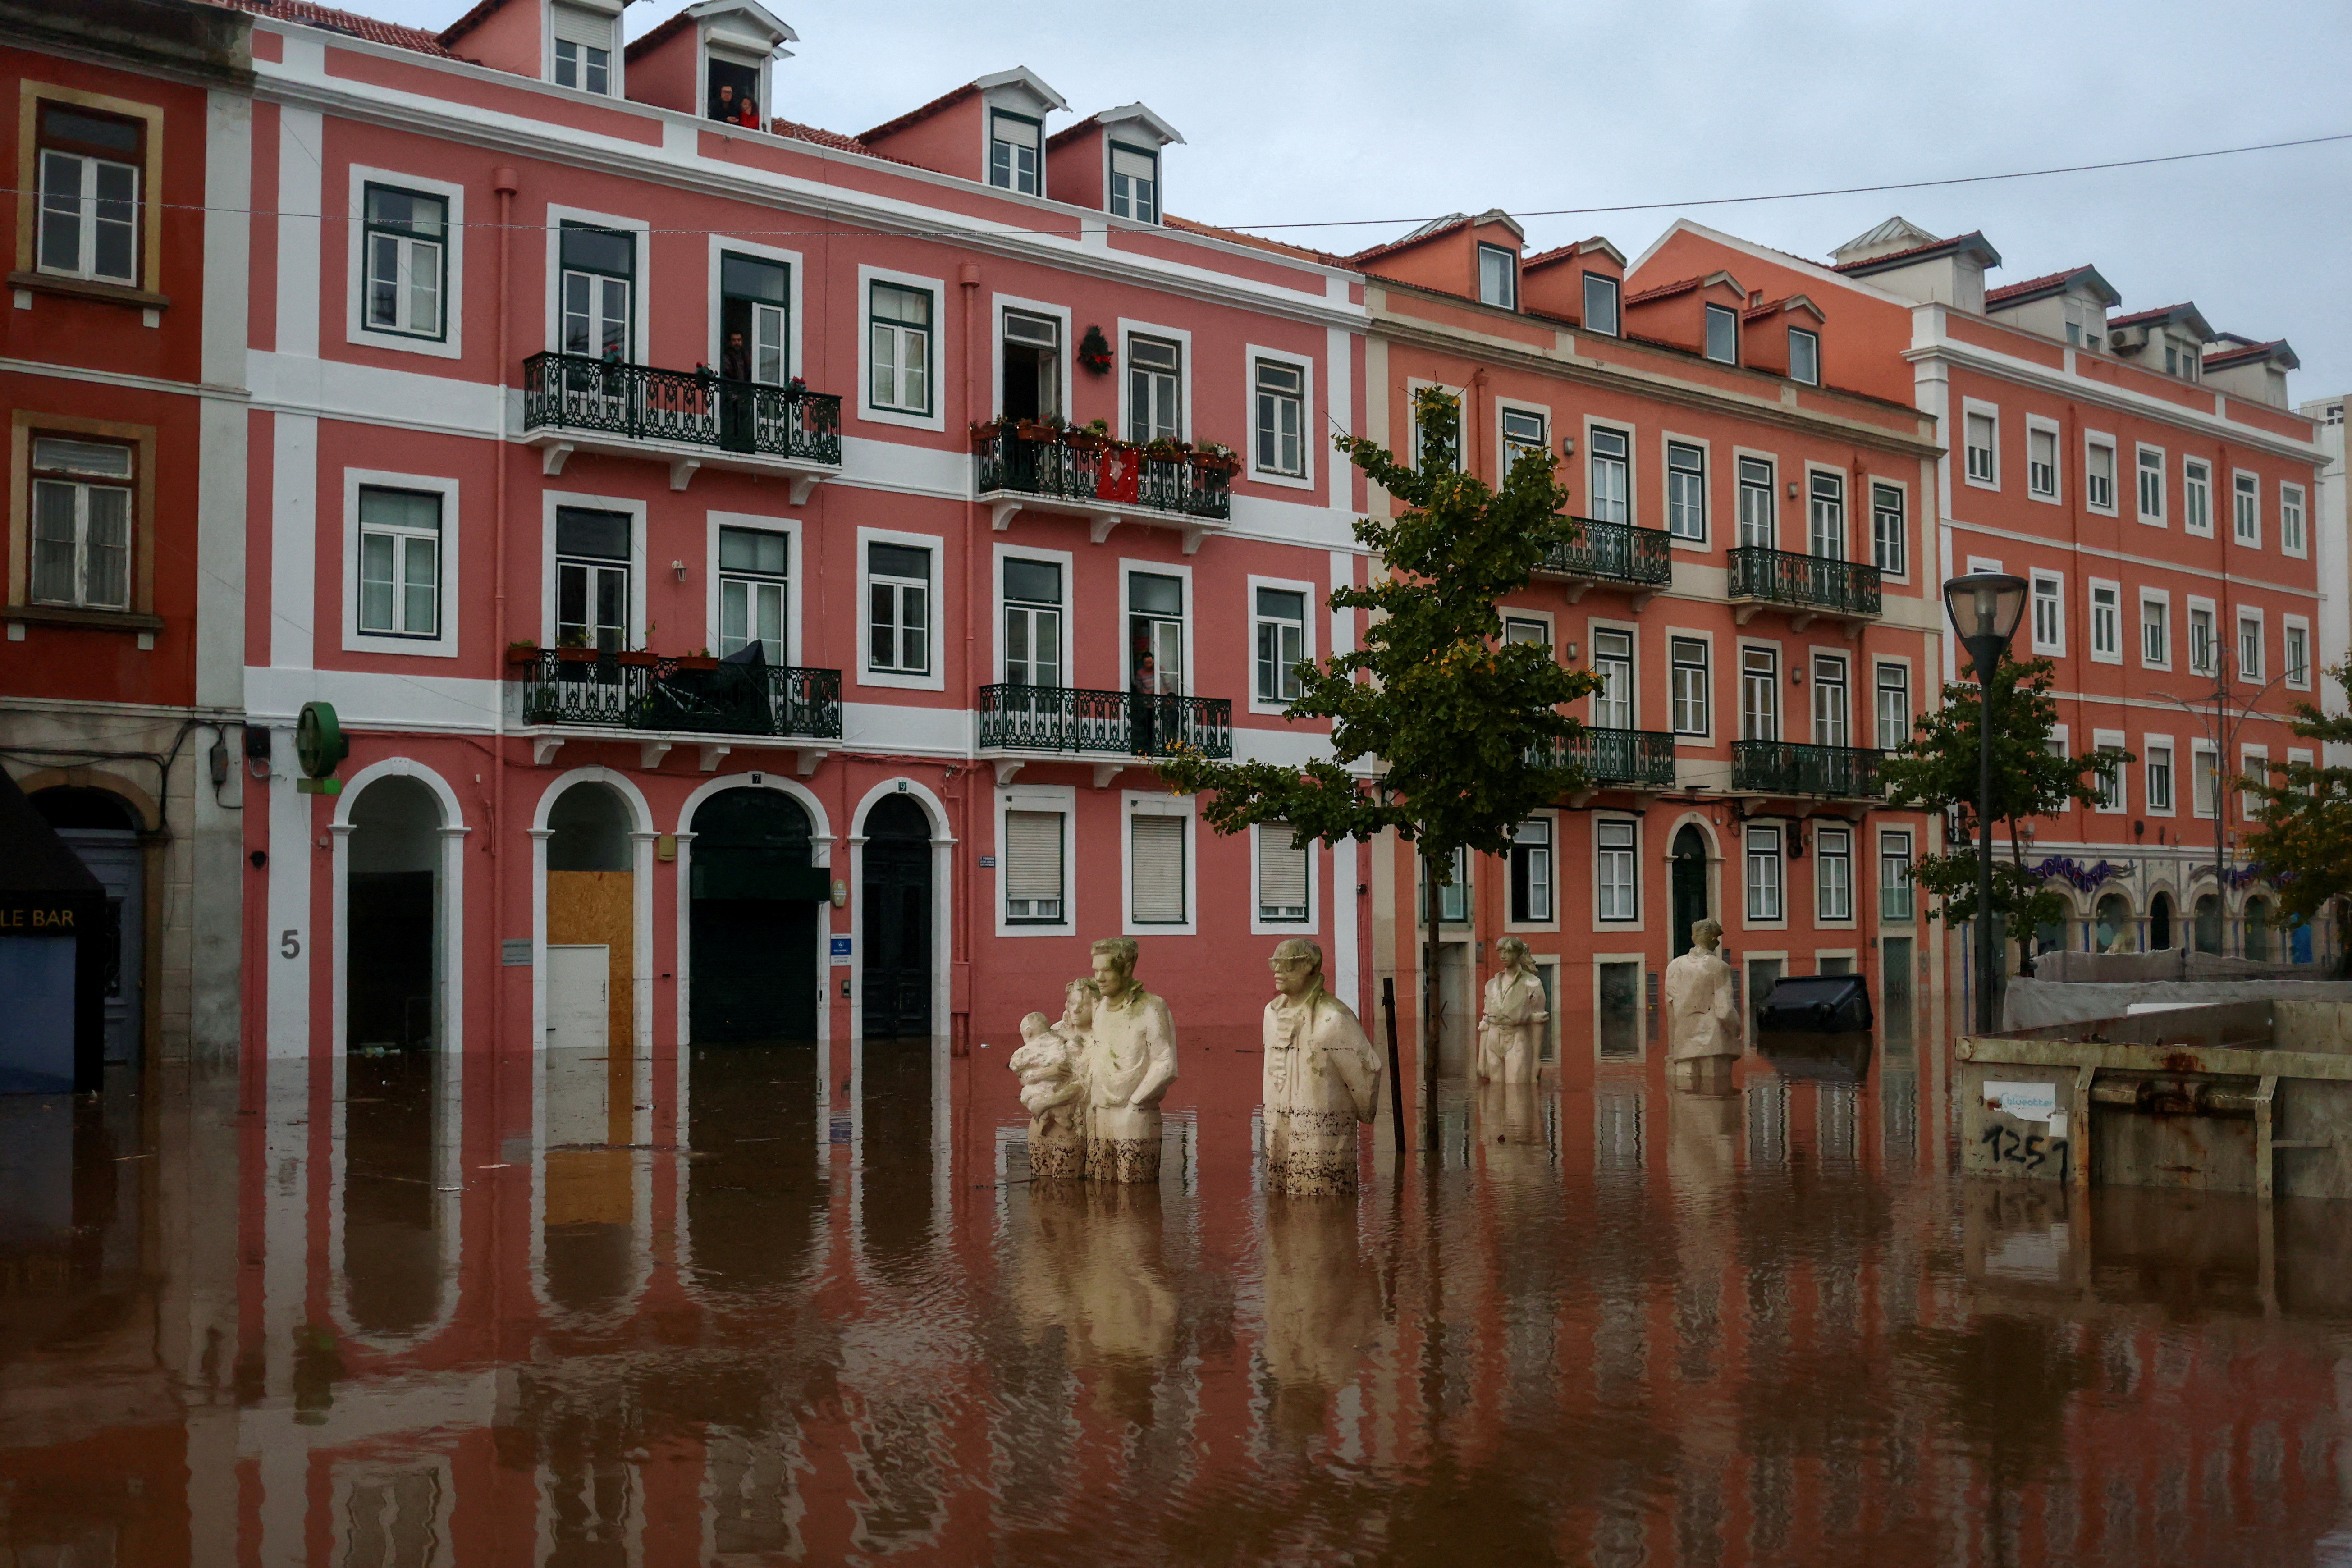 Residents told to stay home as heavy rain, floods batter Portugal